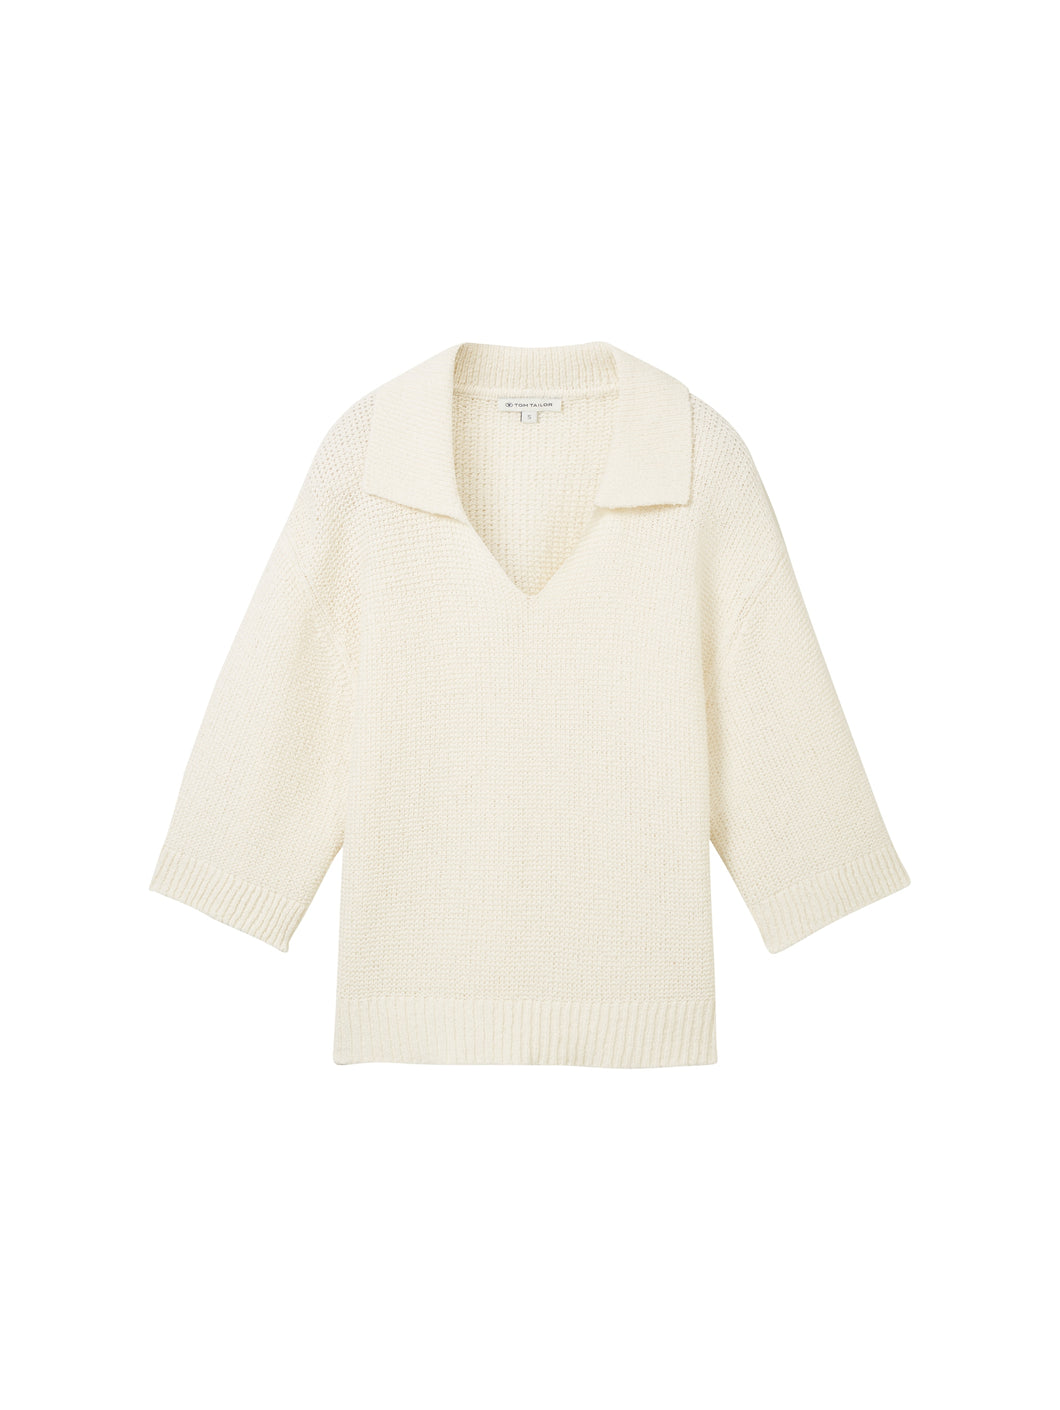 TOM TAILOR KNIT PULLOVER WITH COLLAR whisper white